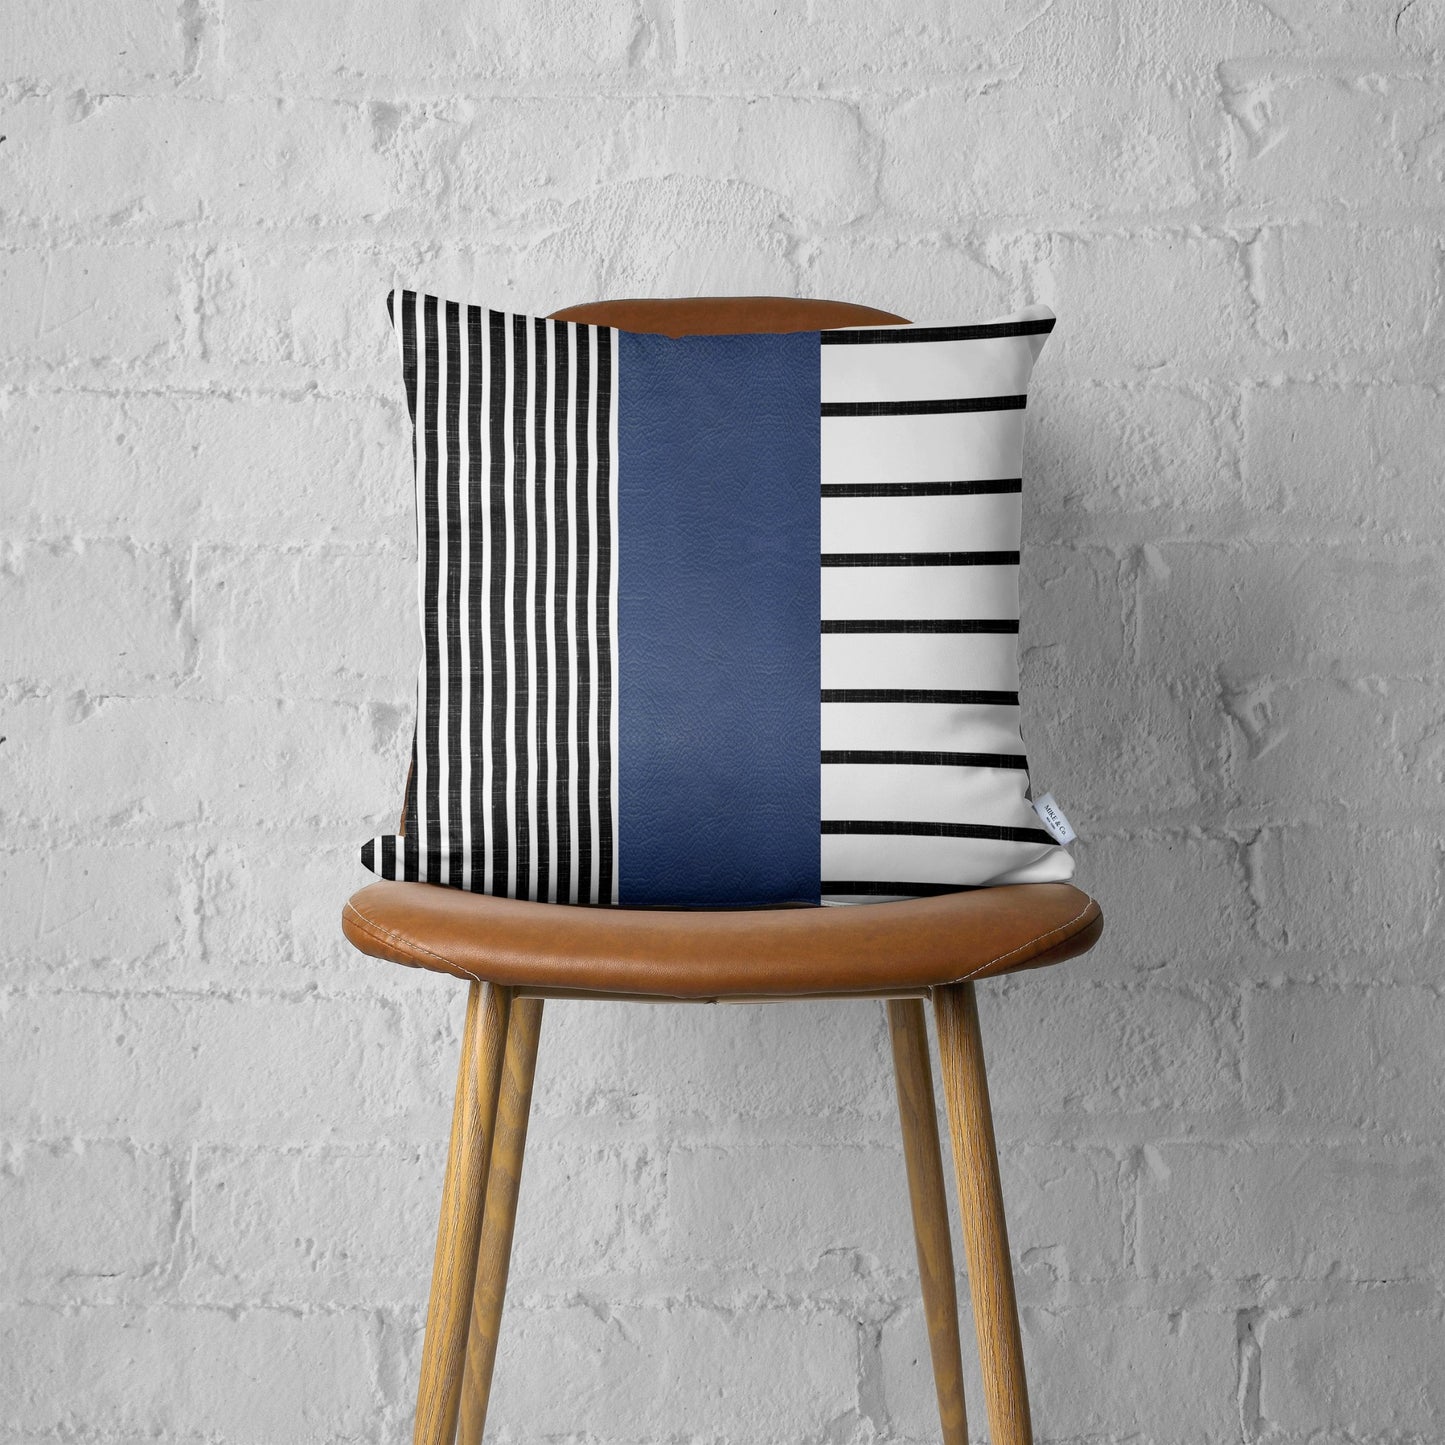 Traditional Navy Blue Faux Leather And Monochromatic Stripes Lumbar Pillow Cover